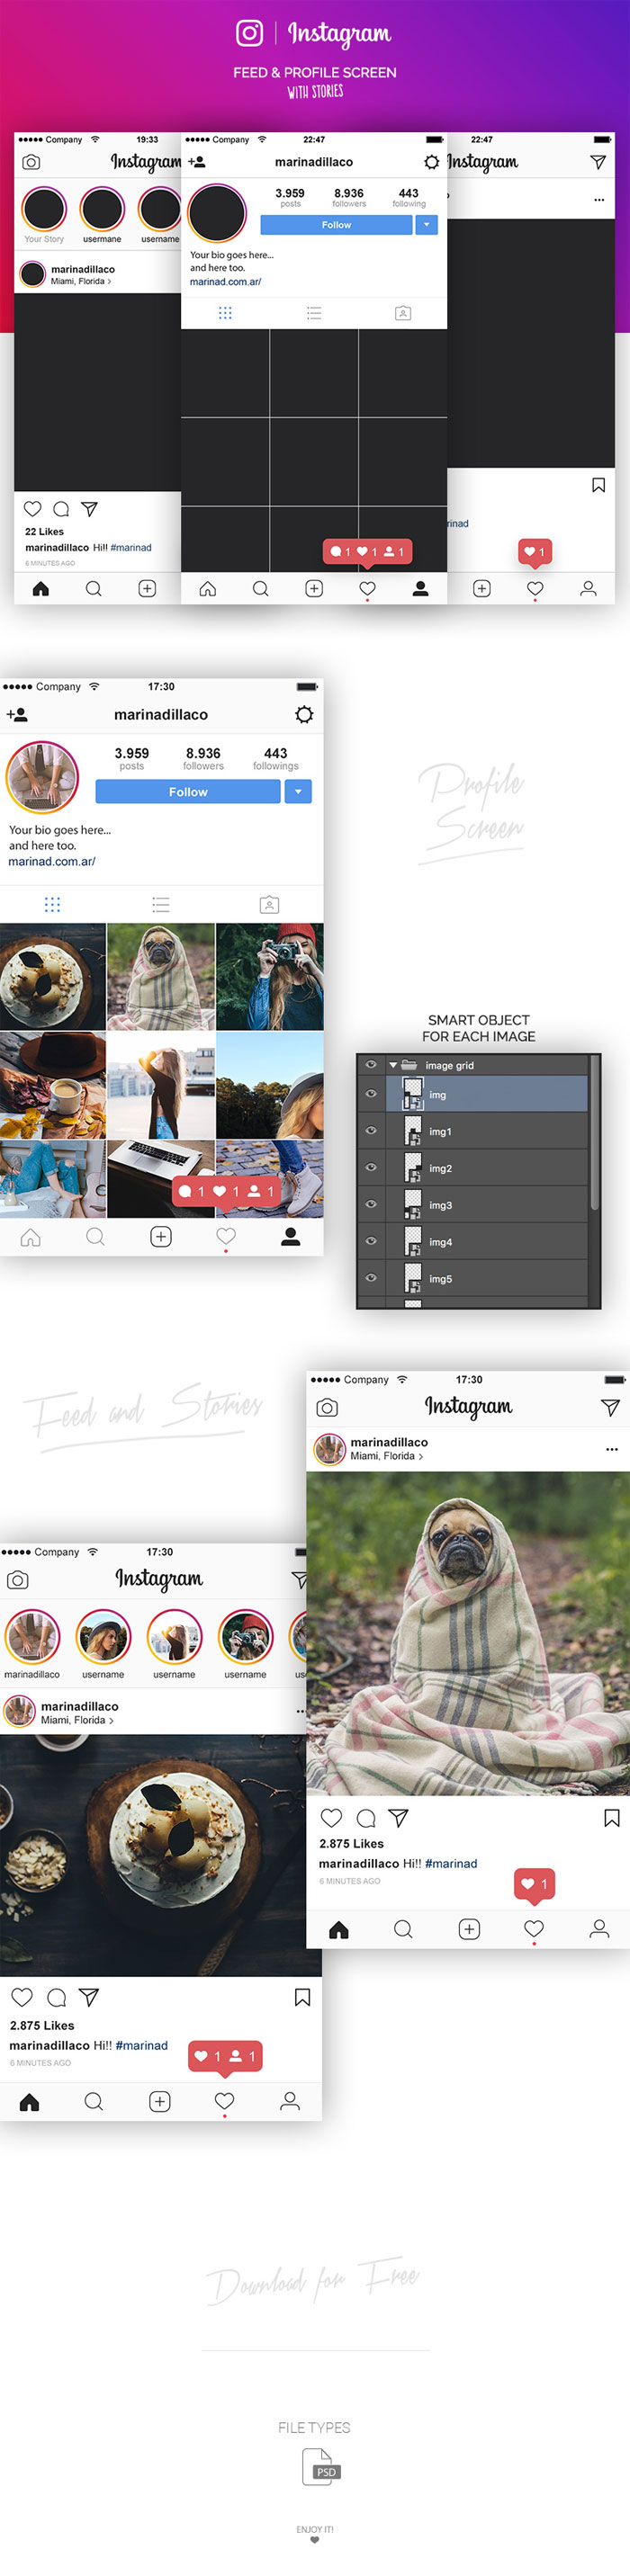 Preview-instagram-2017-psd Instagram templates to download in your presentations